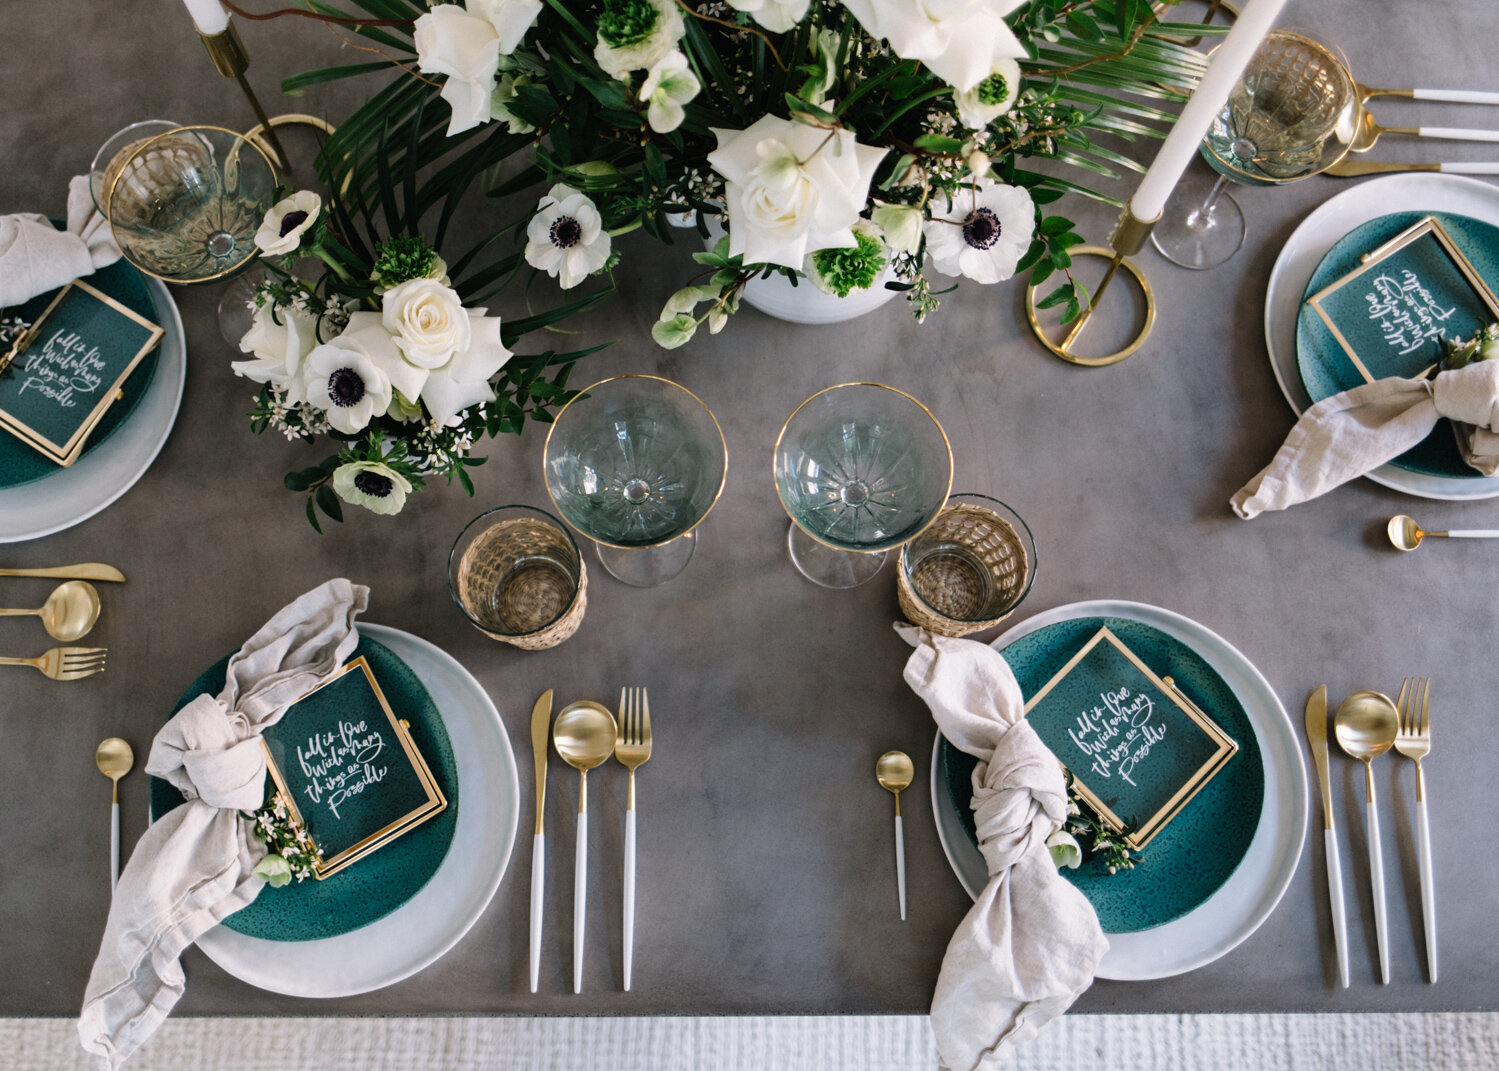 Best hosting essentials for your next dinner party